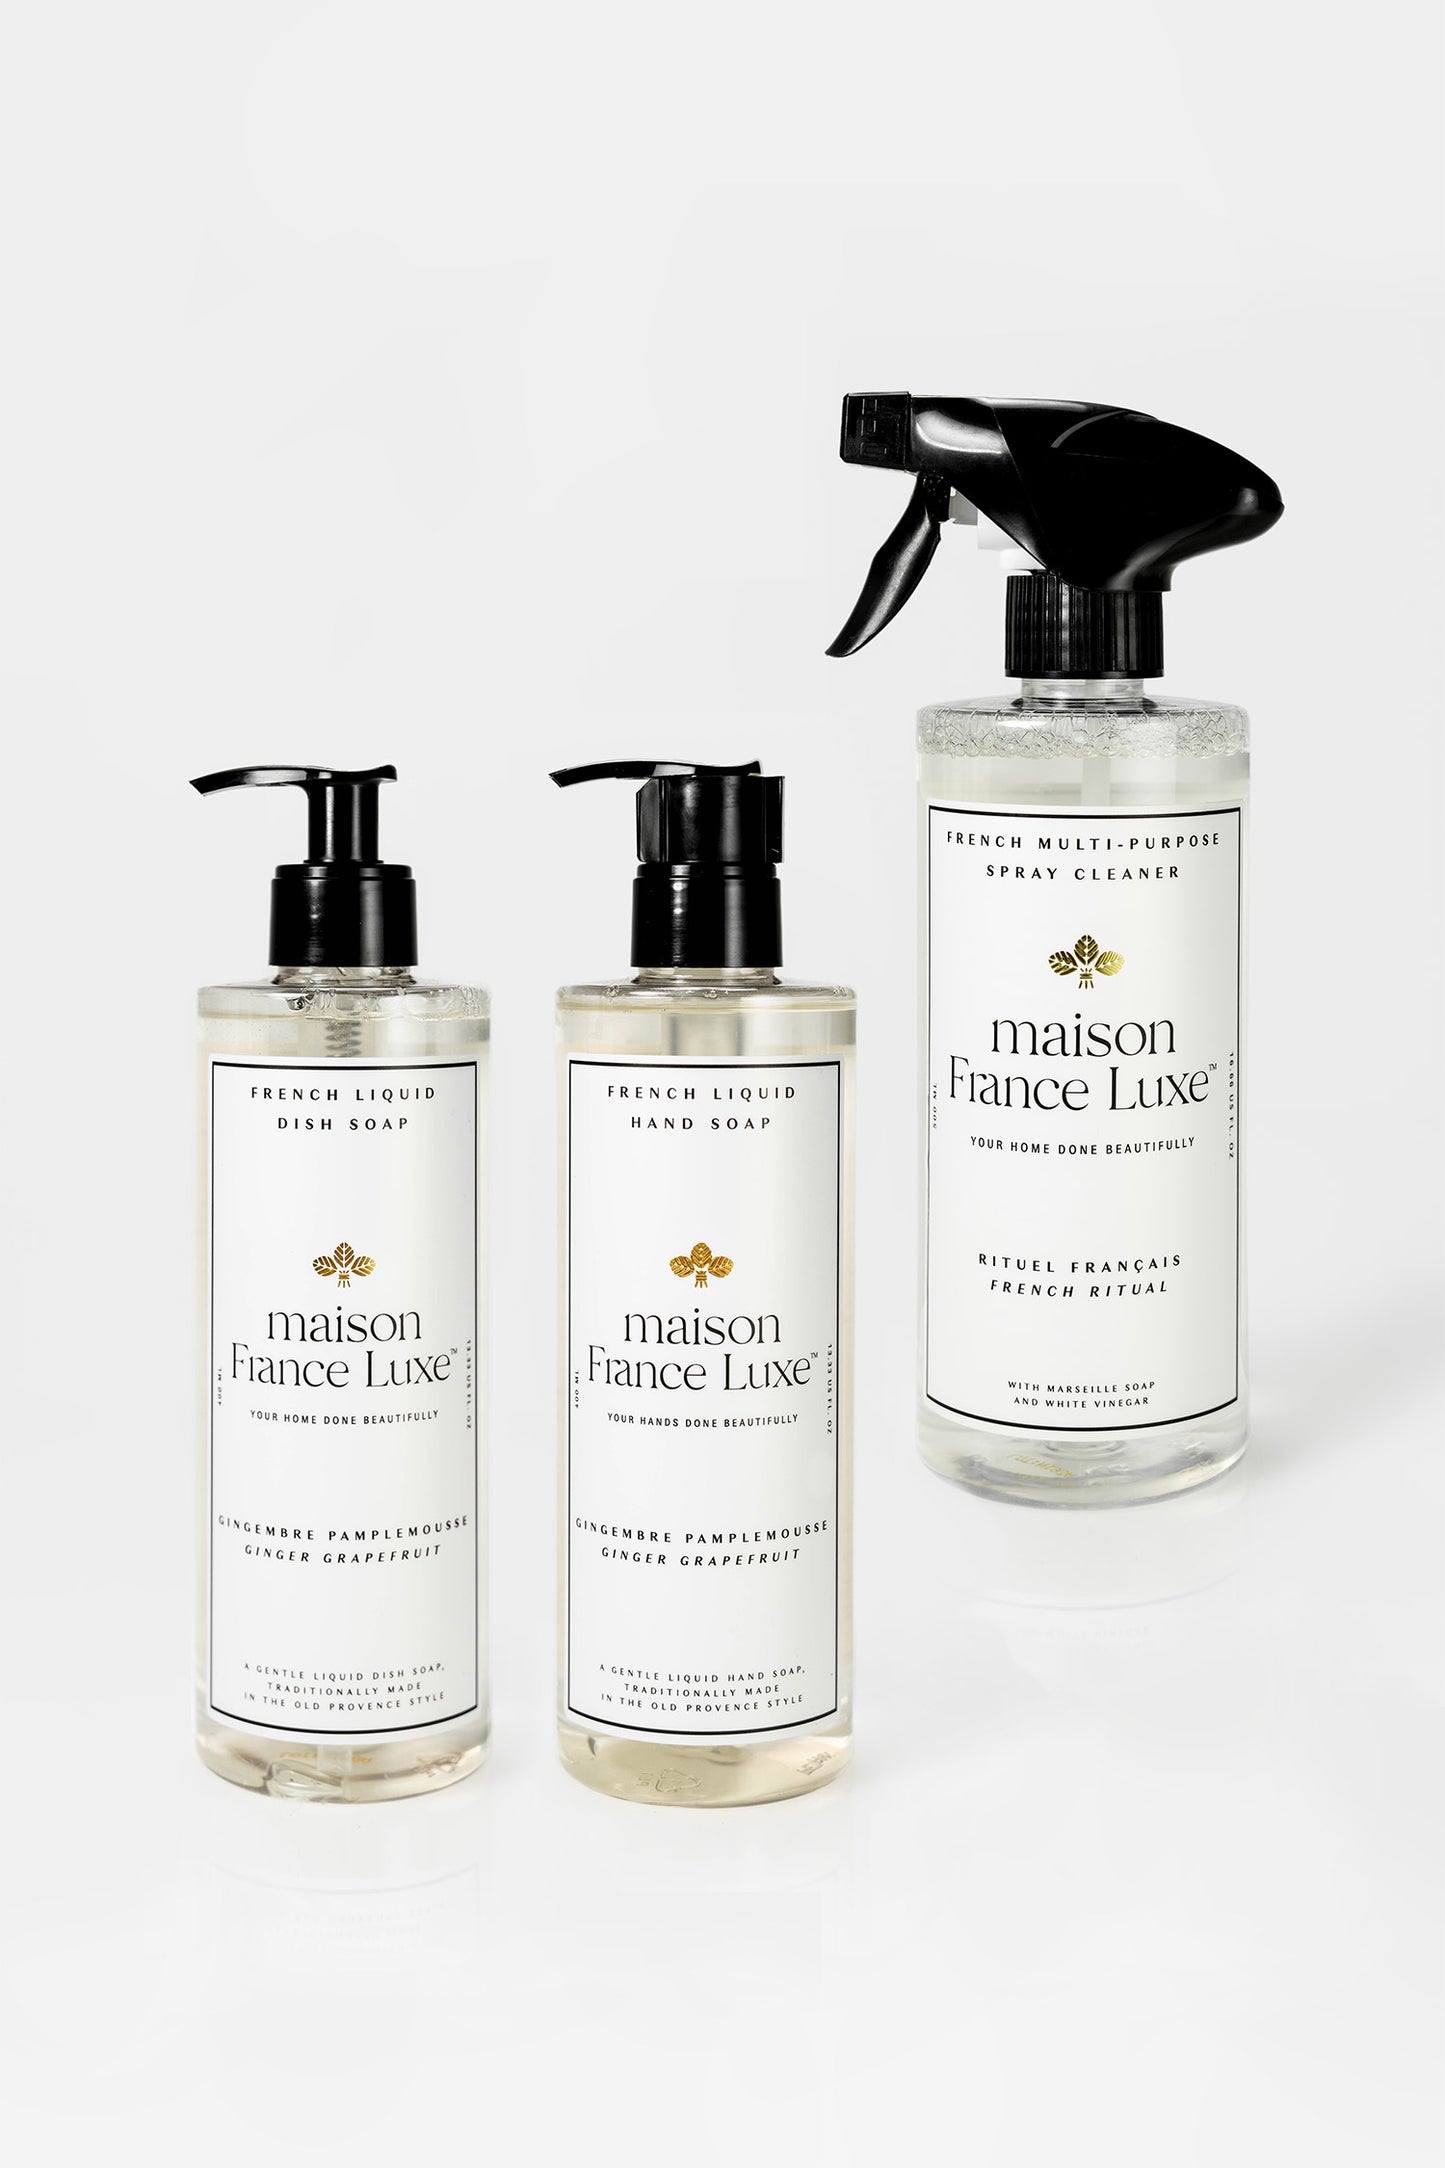 Maison France Luxe Countertop Cleaning Bundle, includes Ginger Grapefruit scented natural dish soap and luxurious hand soap, and natural unscented multipurpose cleaning spray